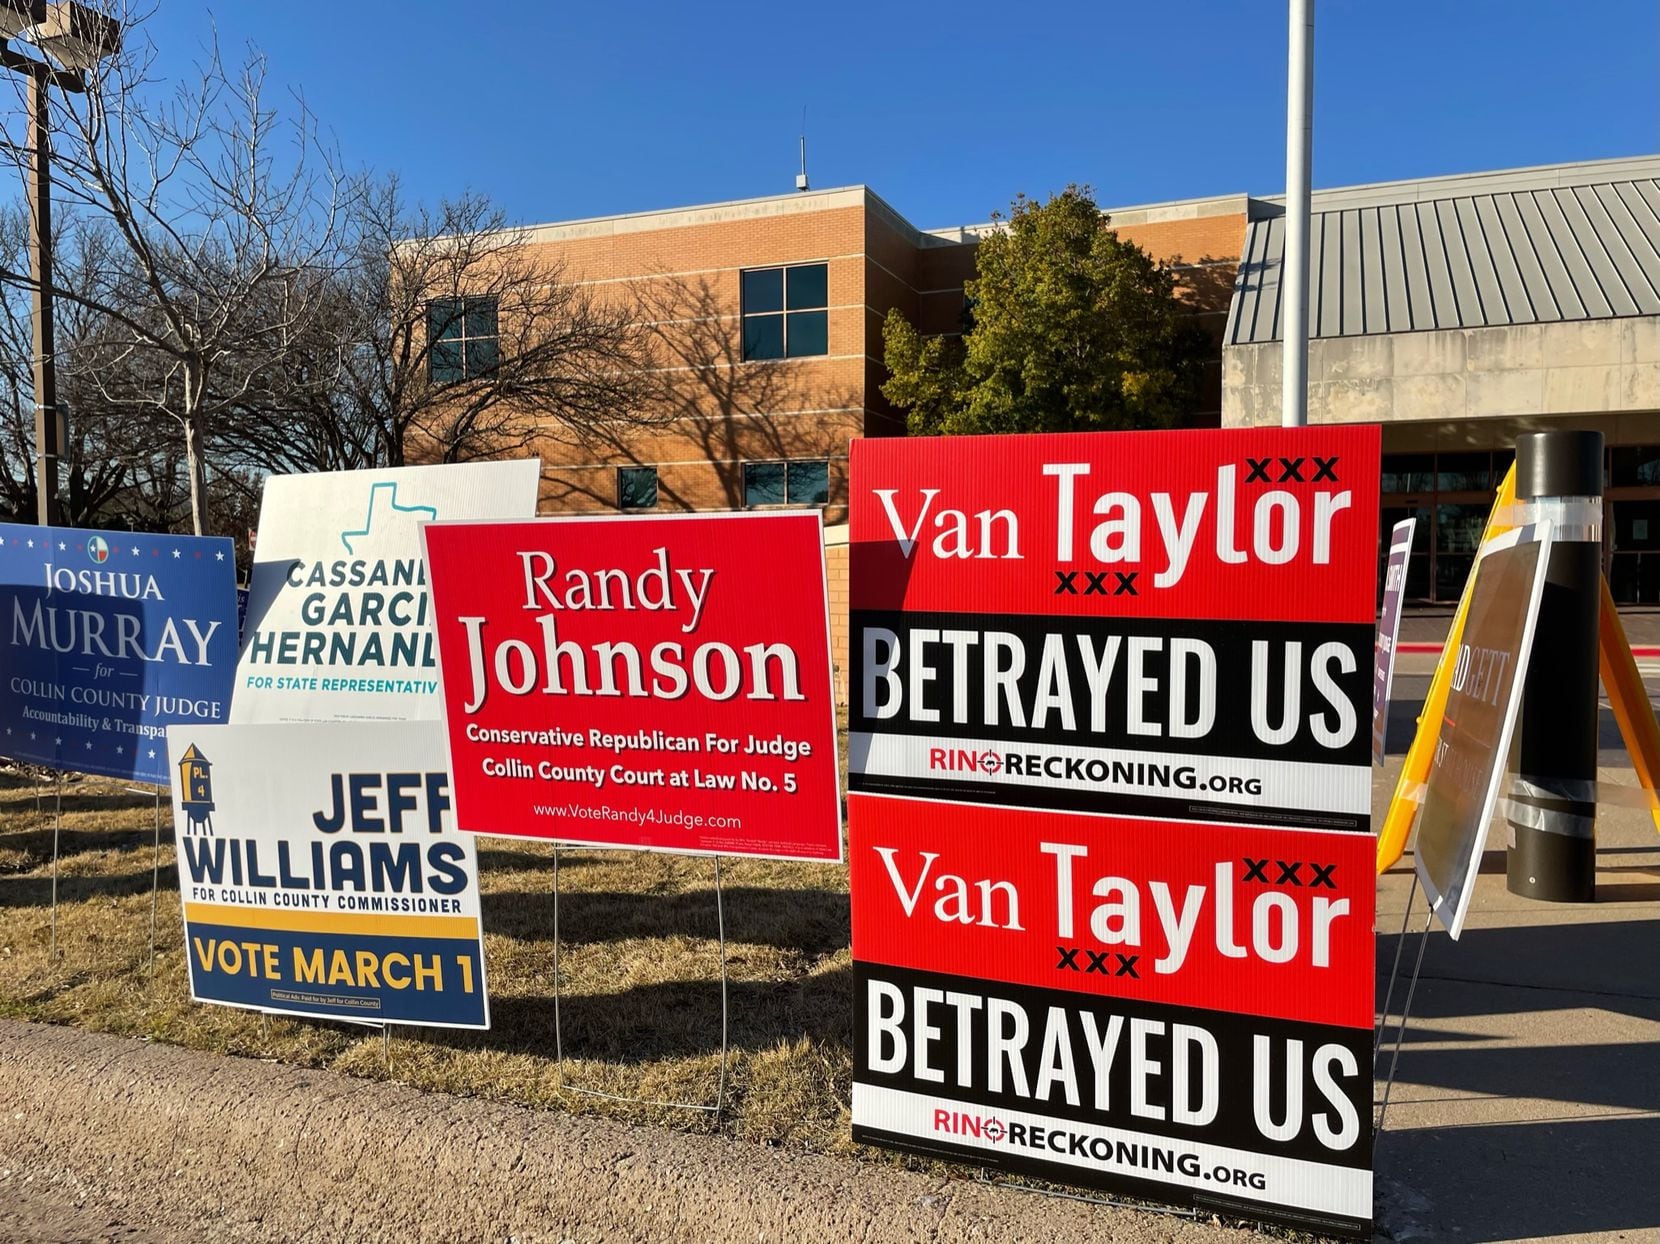 Campaign signs, including signs that read "Van Taylor Betrayed Us" attacking Rep. Van Taylor...